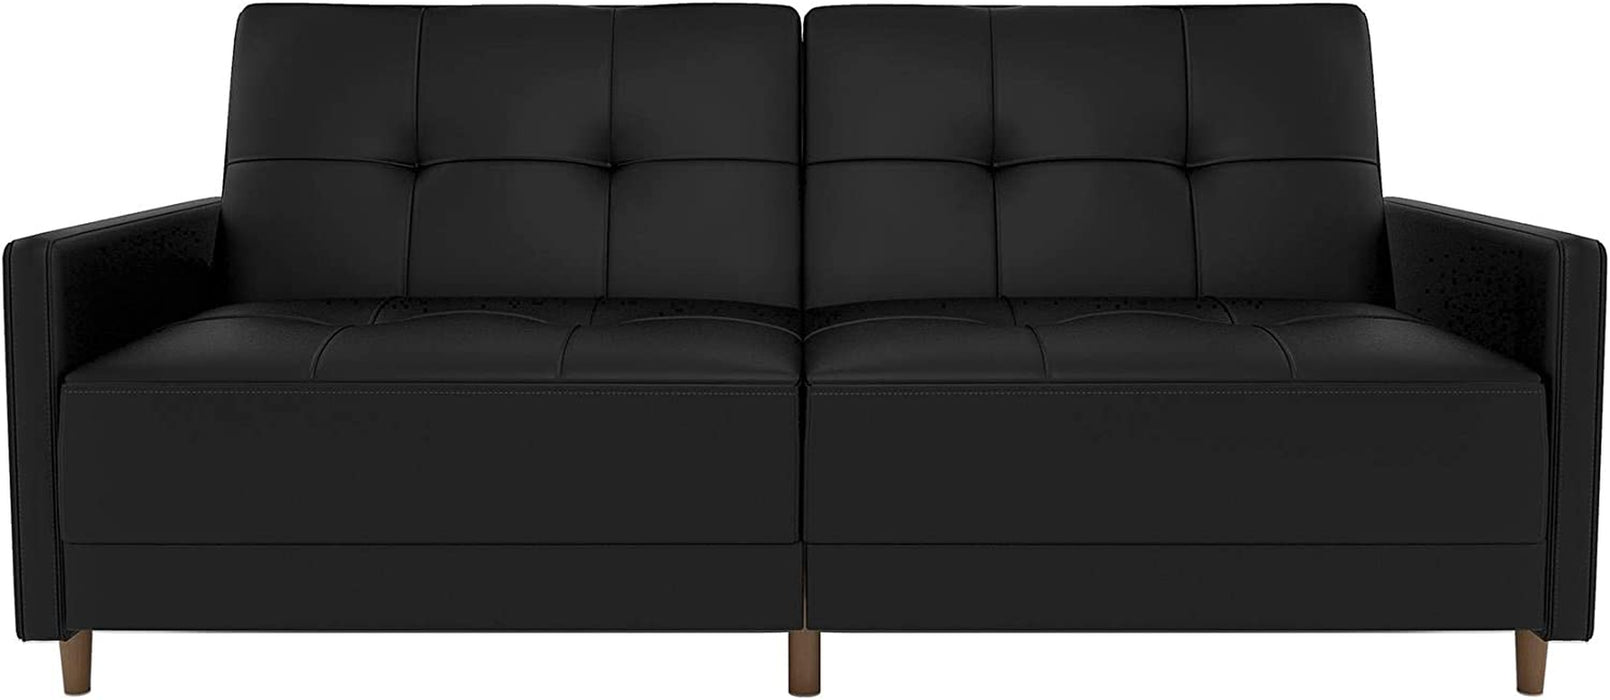 Mid Century Modern Black Faux Leather Sofa Bed